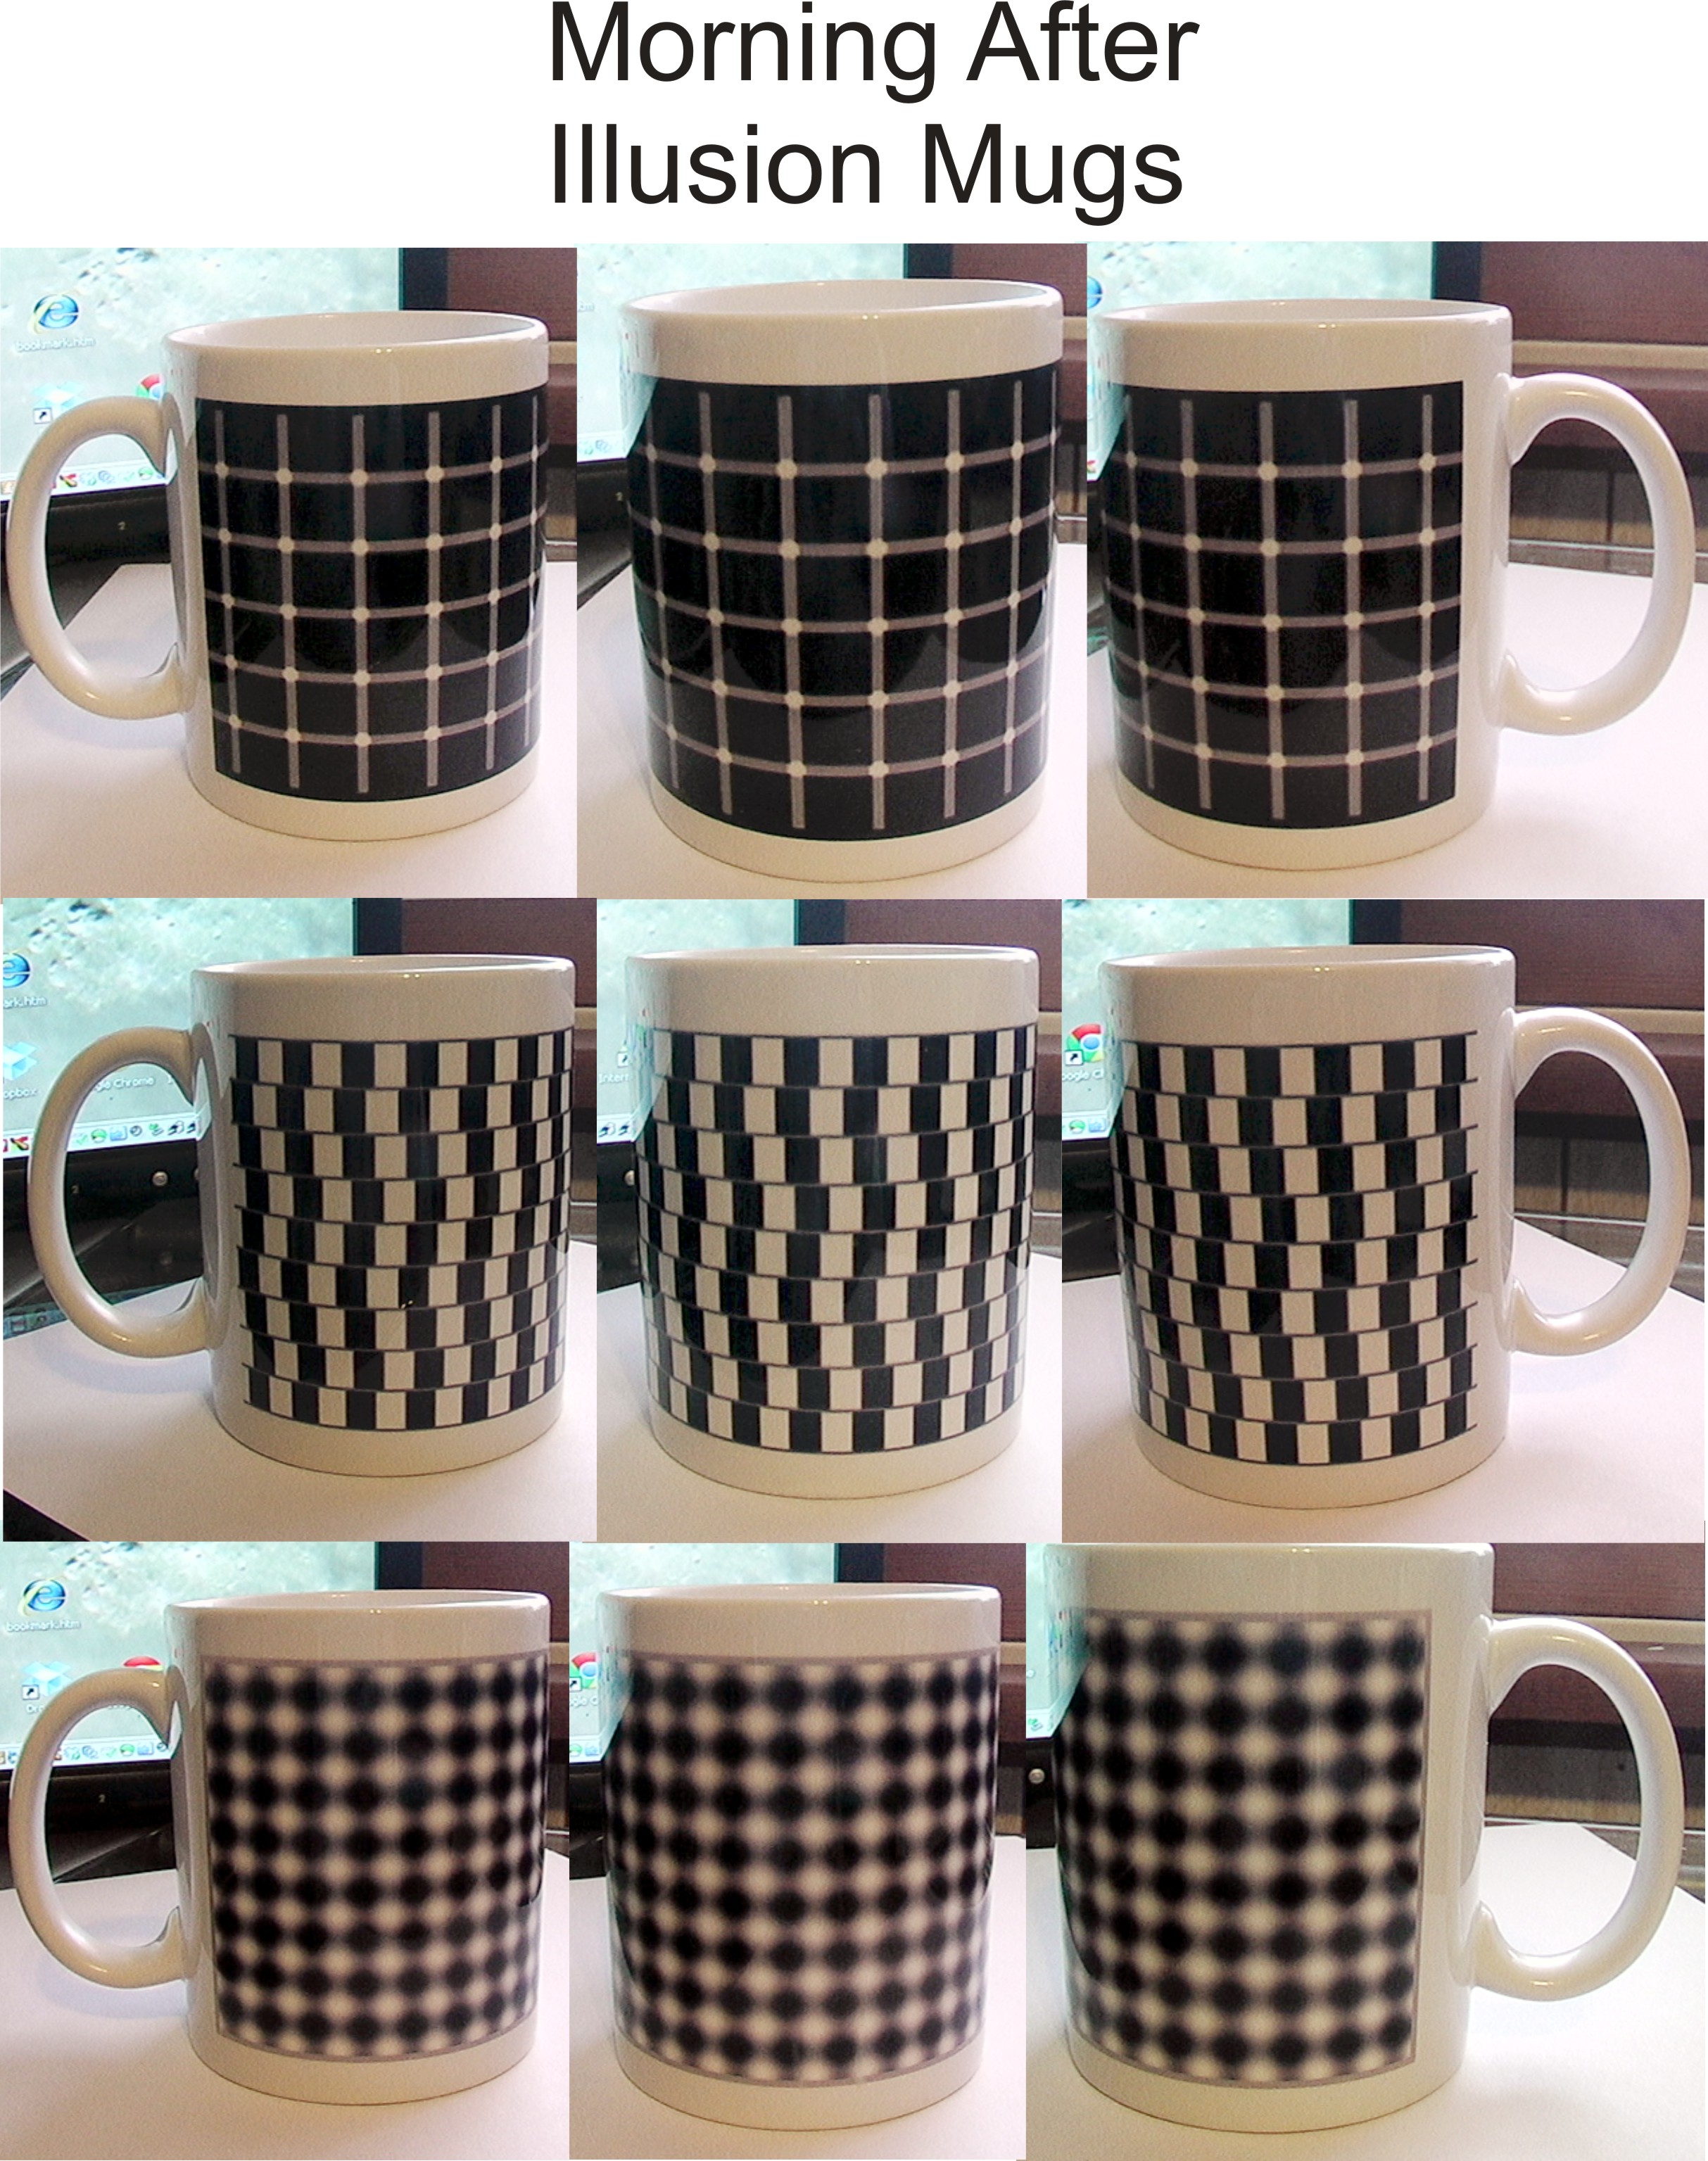 Morning After Mugs made with sublimation printing